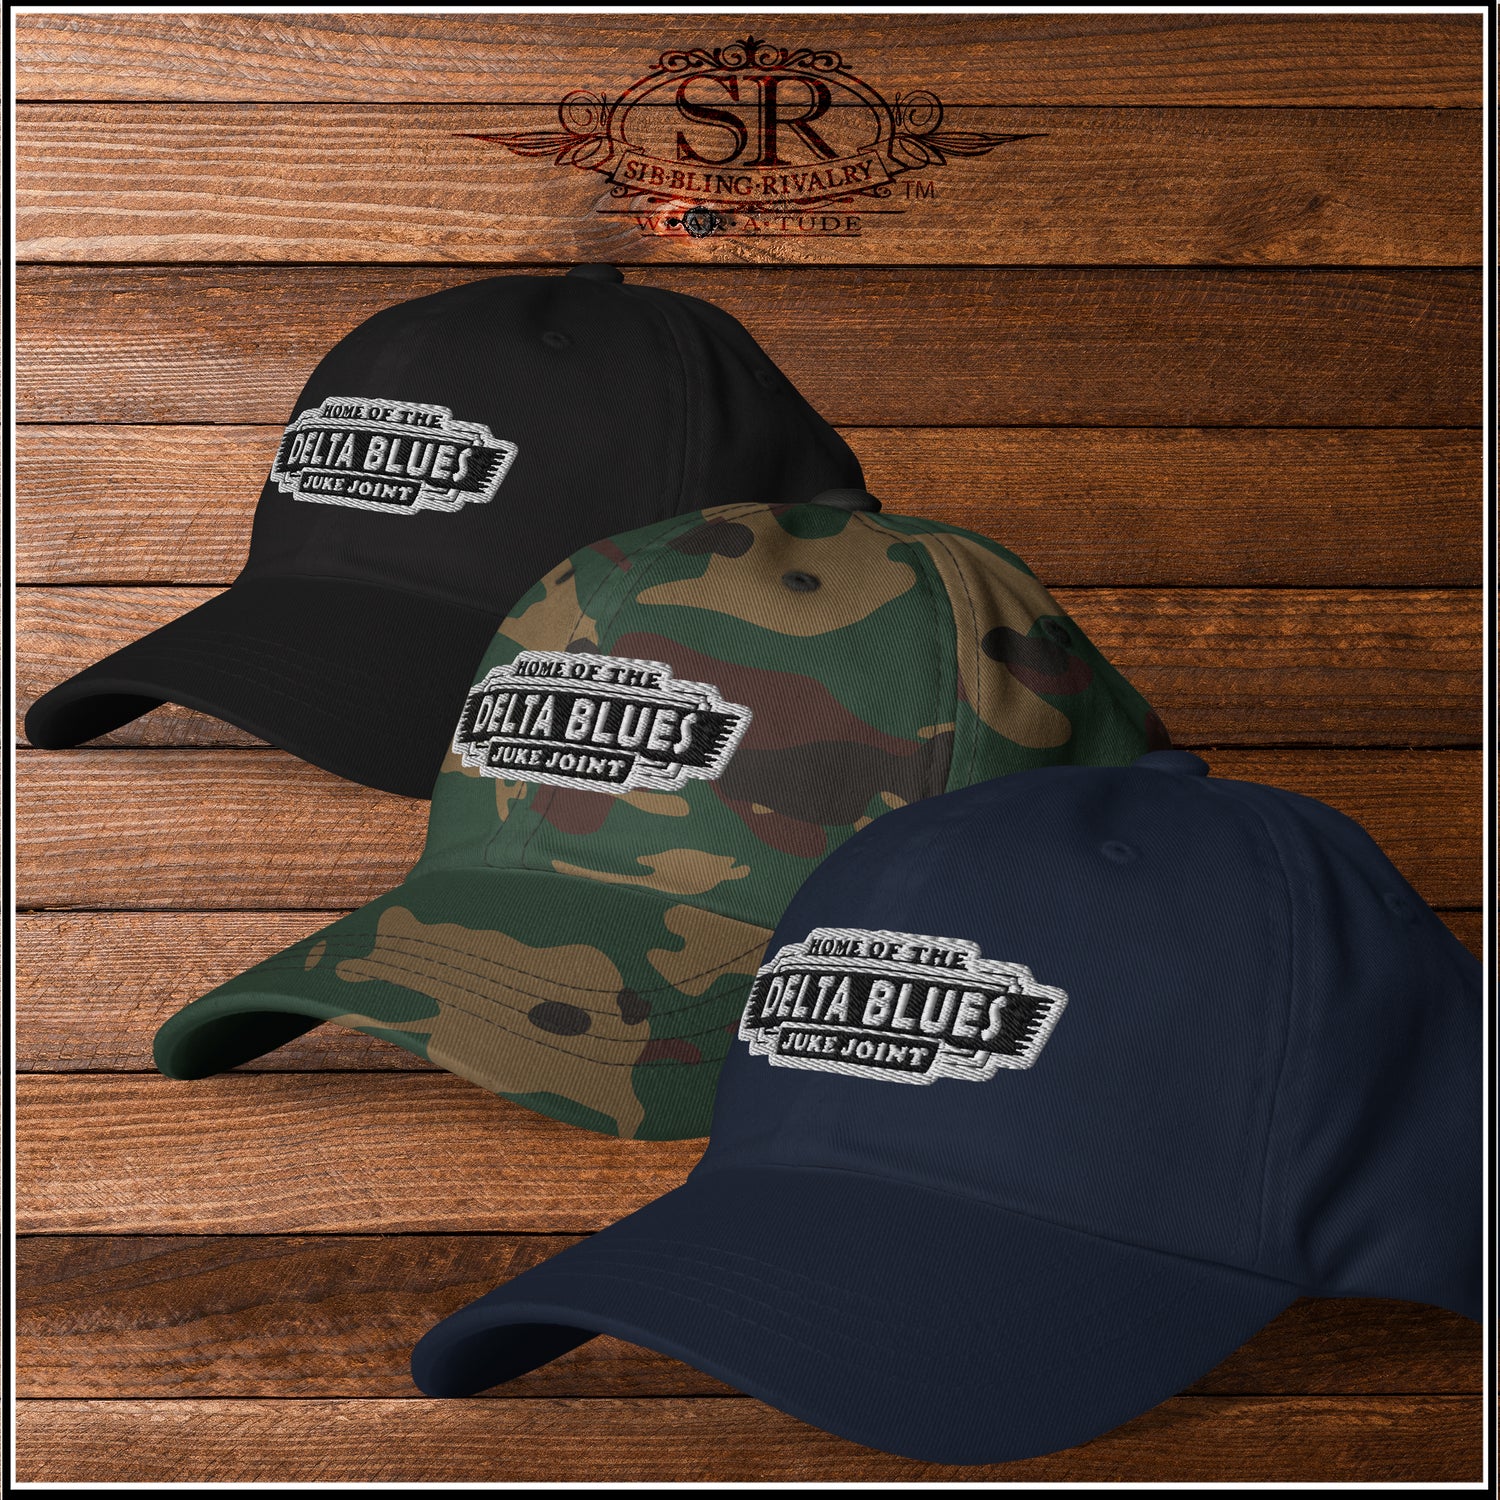 Delta Blues Juke Joint. Blues from the Mississippi Delta region, Quality Blues music hat by Sib.Bling Rivalry Design, Wear Atude 